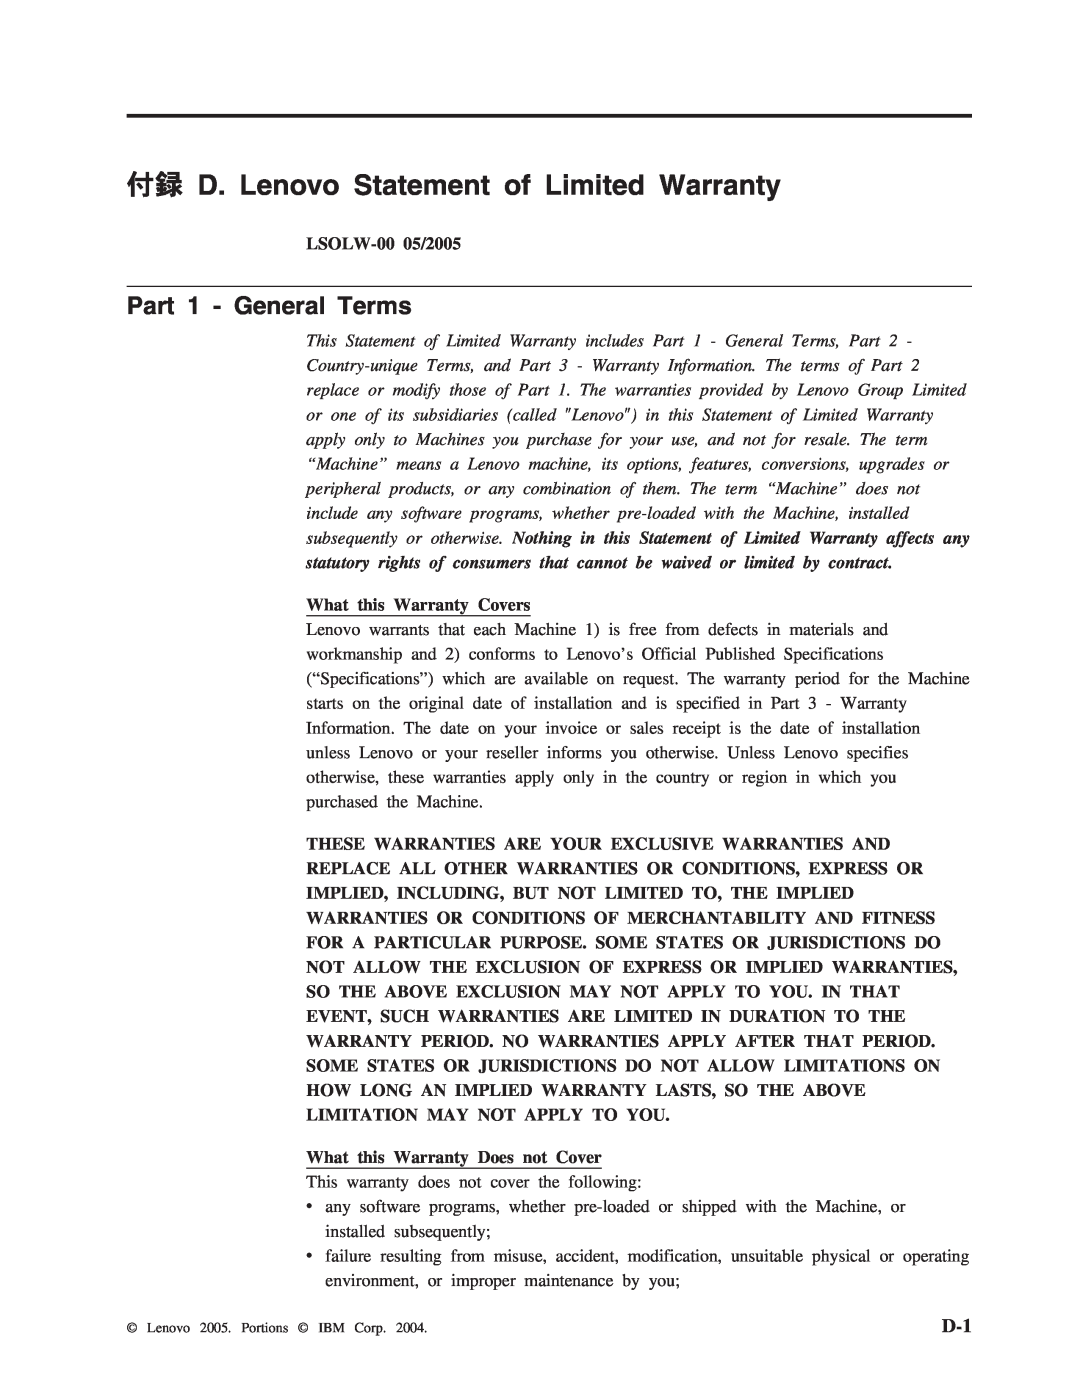 Lenovo 40Y8637, 40Y8692 manual 付録 D. Lenovo Statement of Limited Warranty, Part 1 - General Terms, LSOLW-0005/2005 